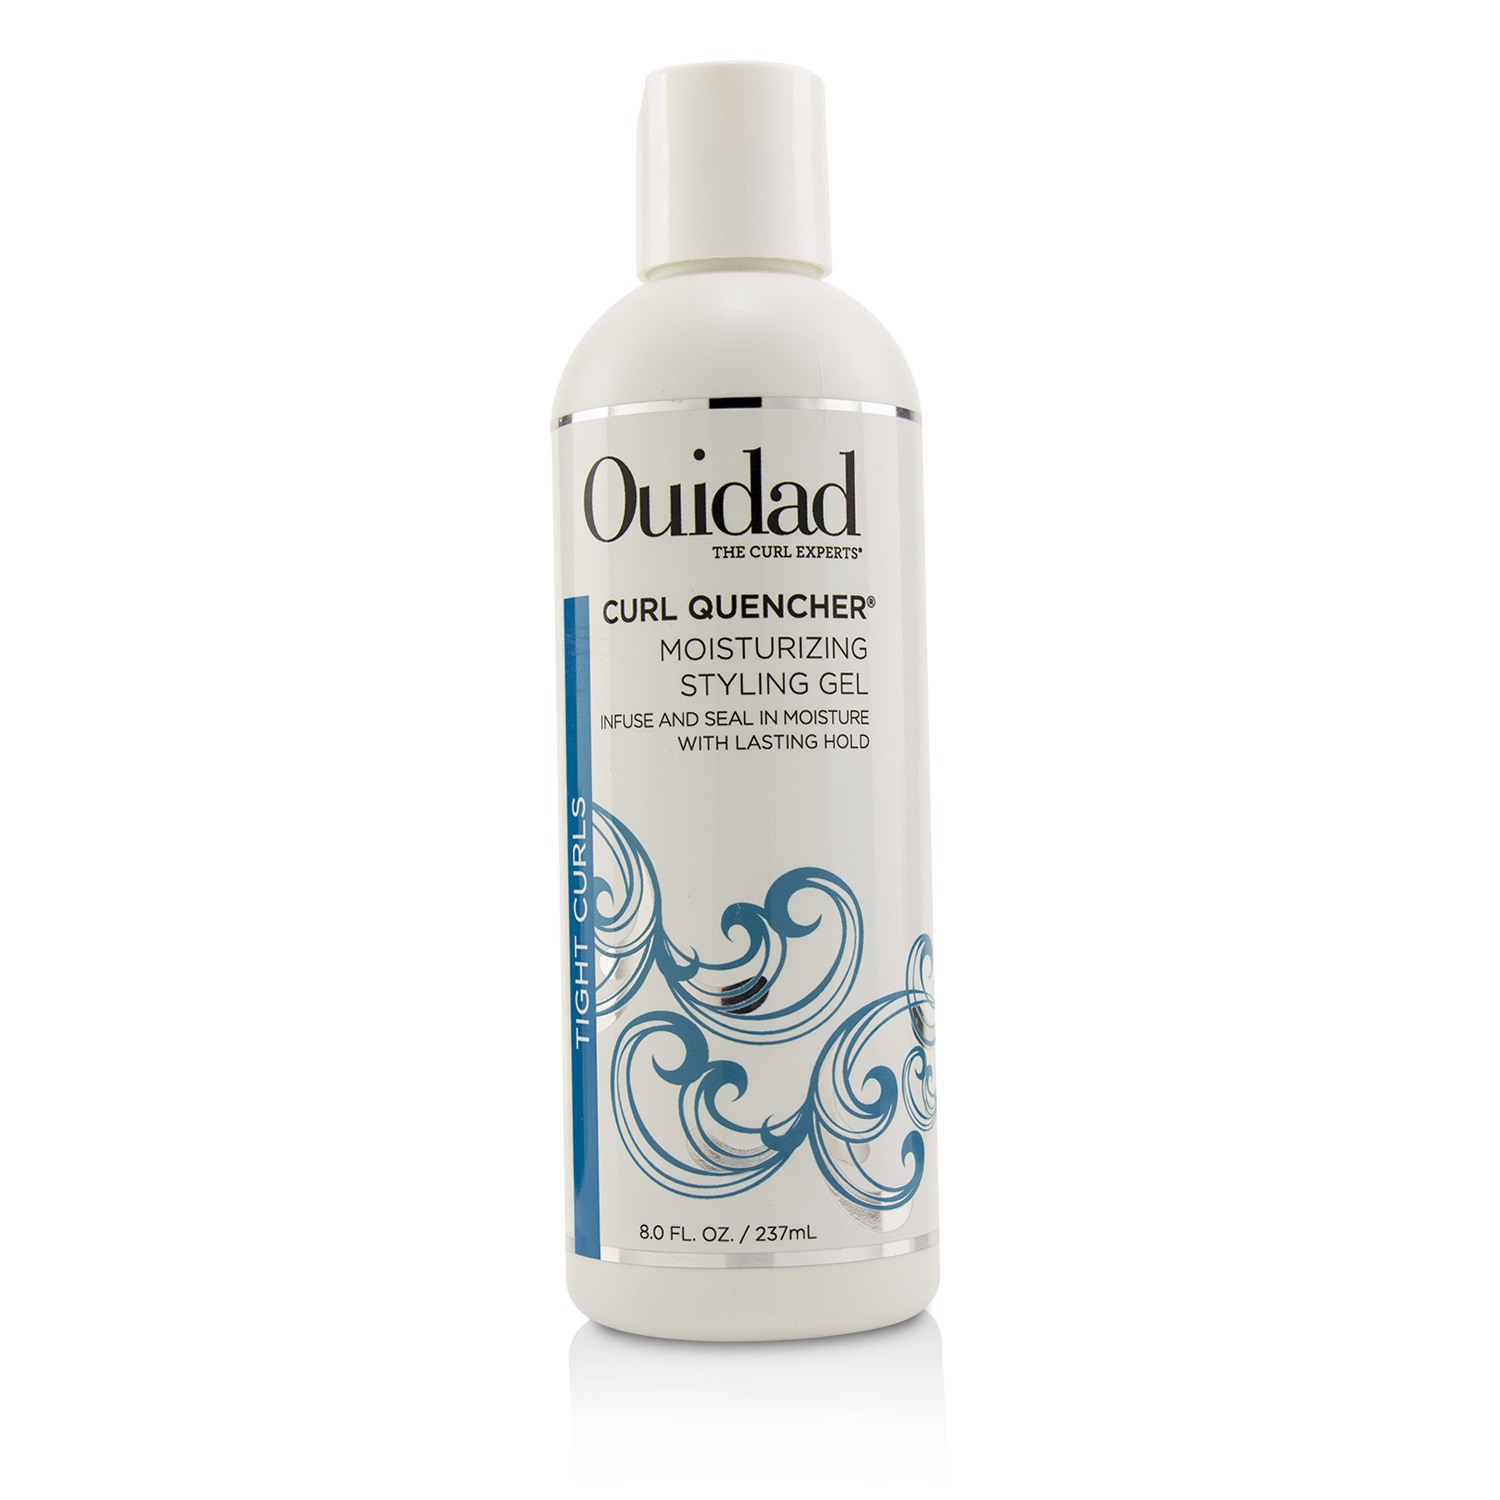 Curl Quencher Moisturizing Styling Gel (Tight Curls) Ouidad Image